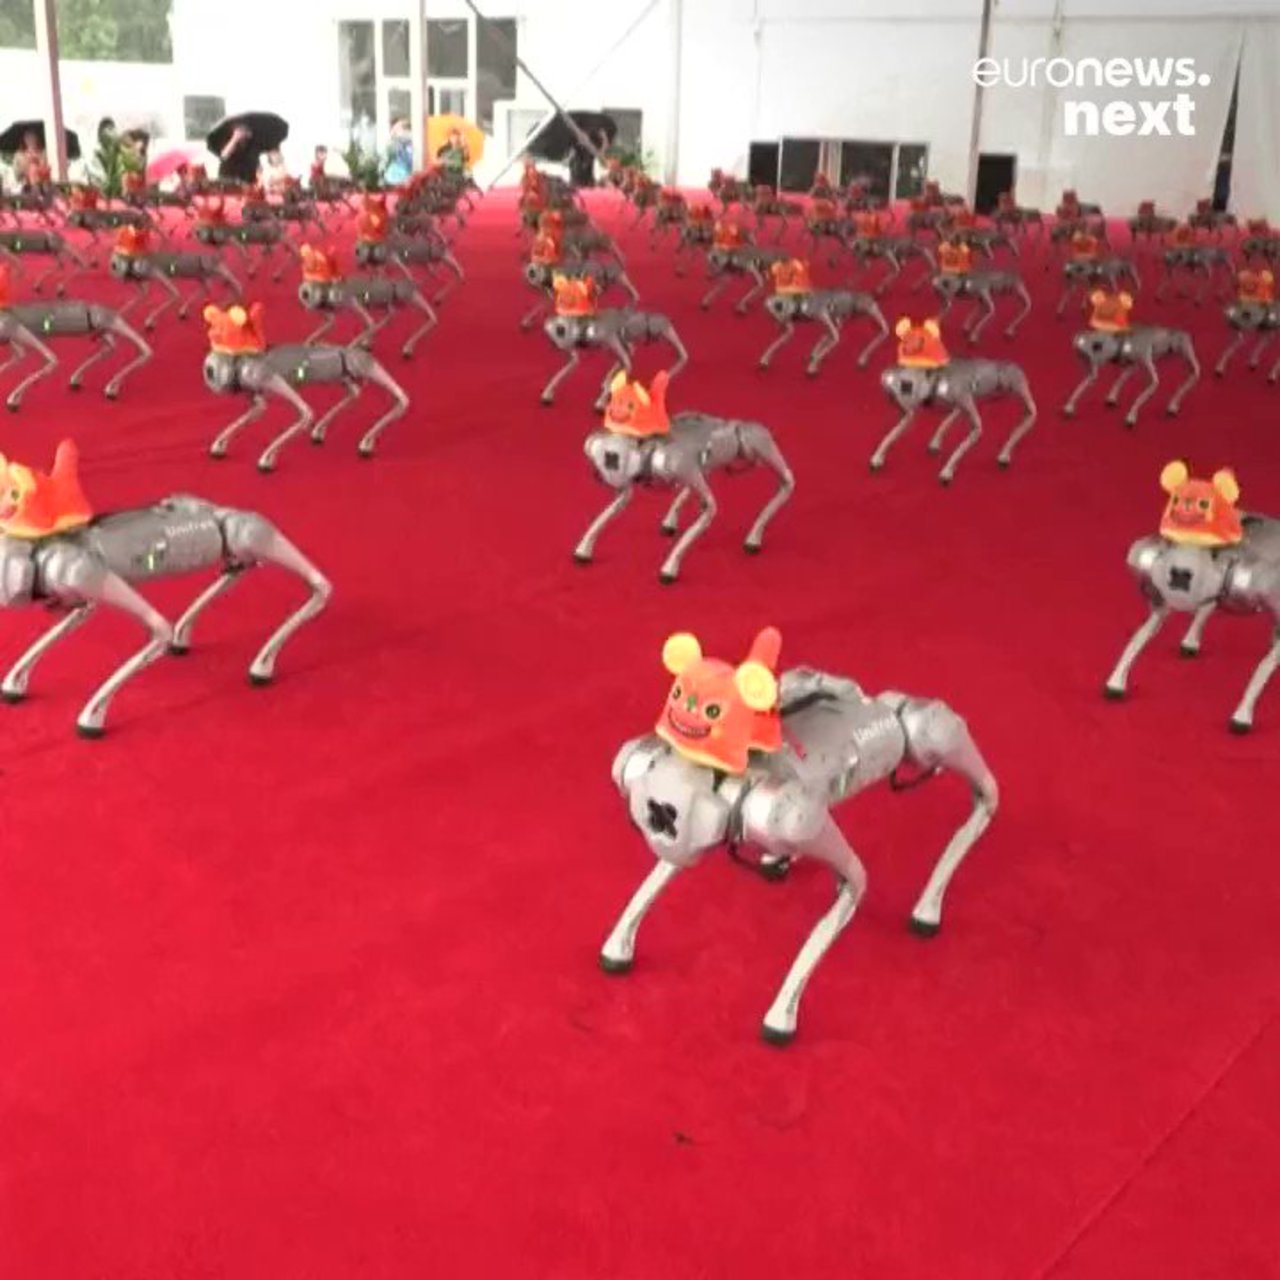 Highlights of the annual World #Robot Conference in Beijing by @euronewsnext #AI #ArtificialIntelligence #MI #Robotics #Engineering #Innovation #FutureOfWork #Tech #Technology cc: @terenceleungsf @wil_bielert @ronald_vanloon https://t.co/tUXNT4uiUa